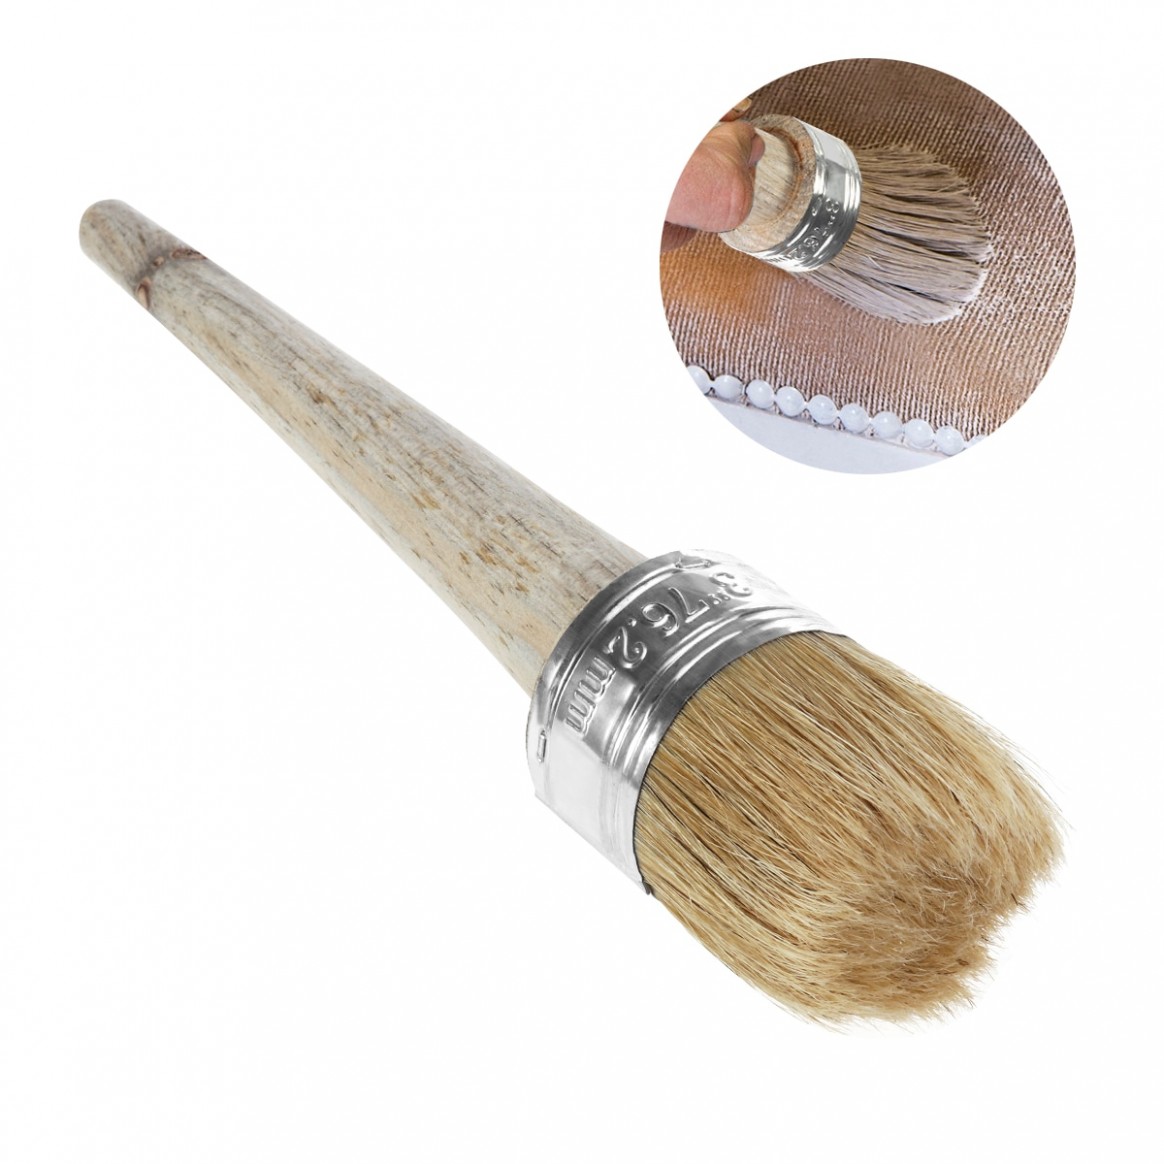 Us $9.9 9% Off|chalk Paint Wax Brush For Painting Or Waxing Furniture Stencils Folkart Home Decor Wood Large Brushes With Natural Bristles In Paint ..